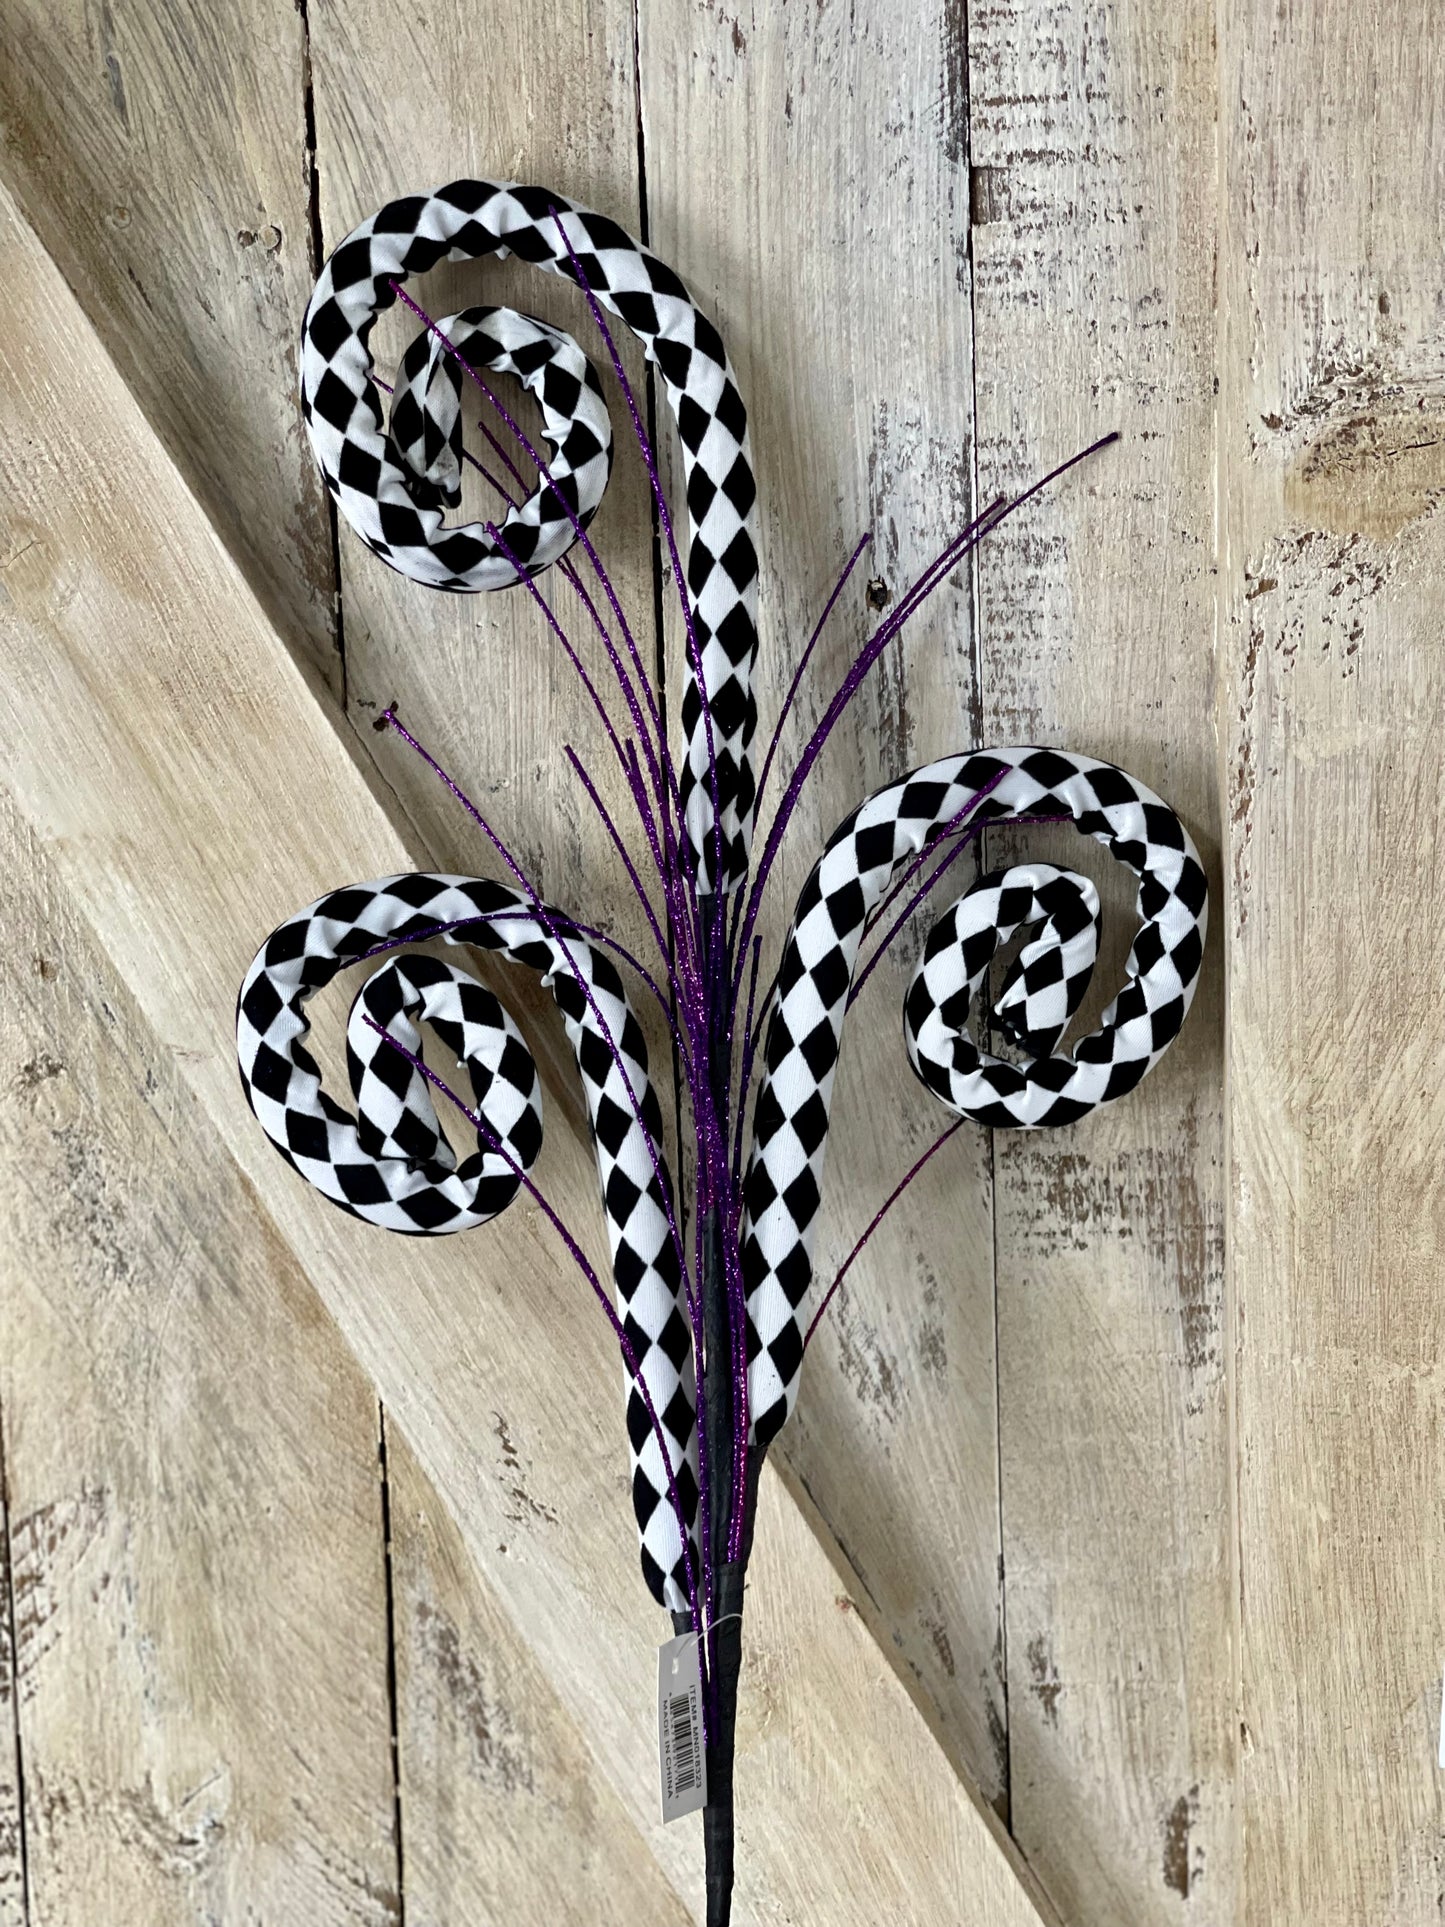 31 Inch Harlequin Tubing With Purple Spray